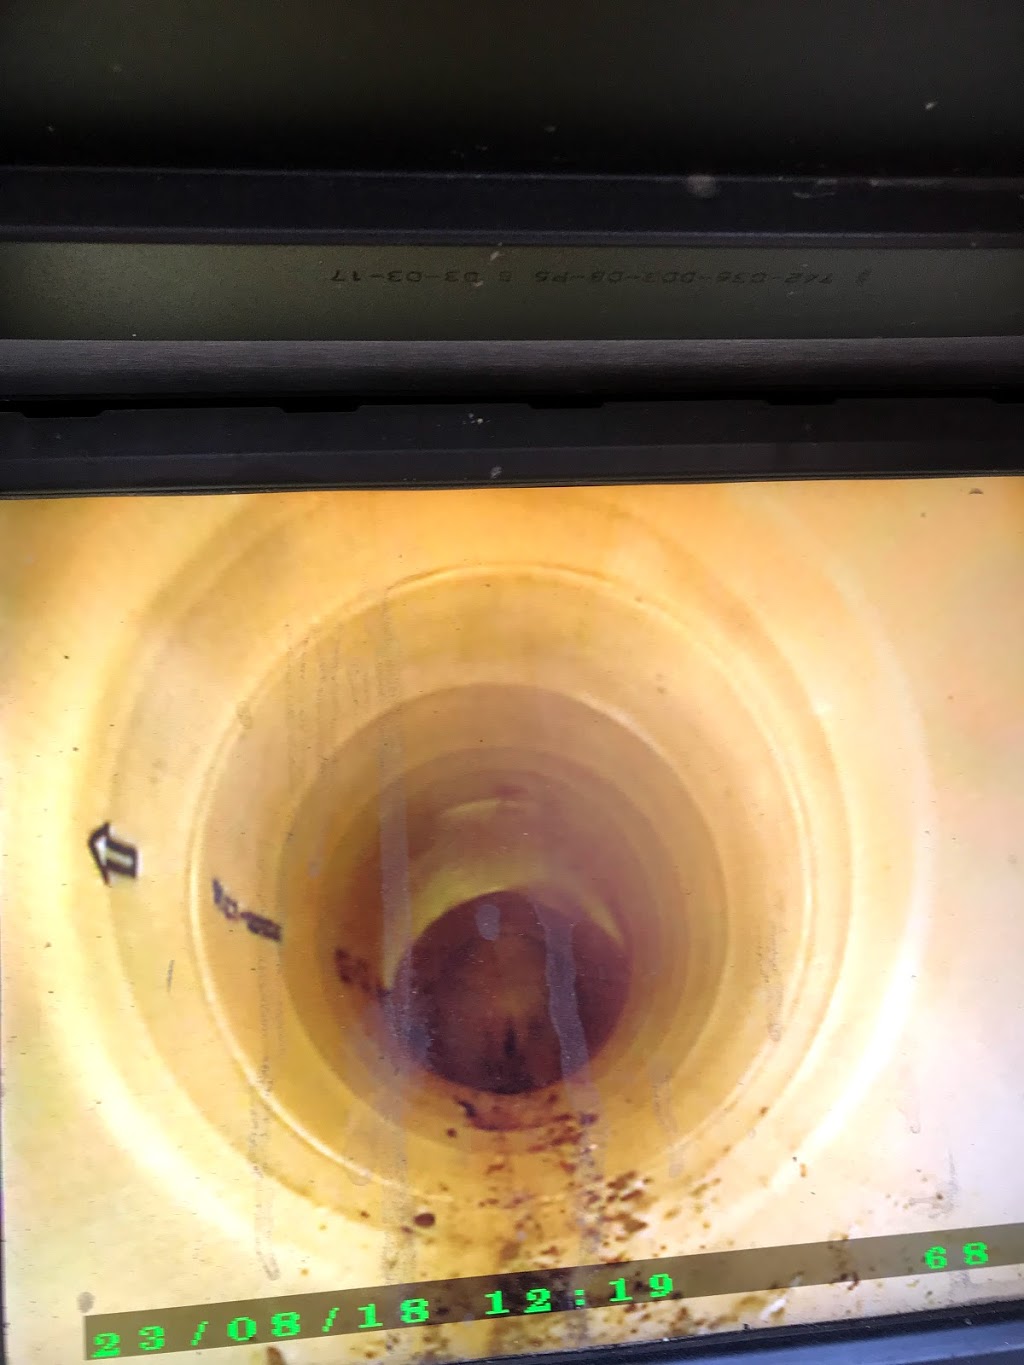 Down Under Pipe Relining | plumber | Mona Vale Rd, St. Ives NSW 2074, Australia | 0417142430 OR +61 417 142 430